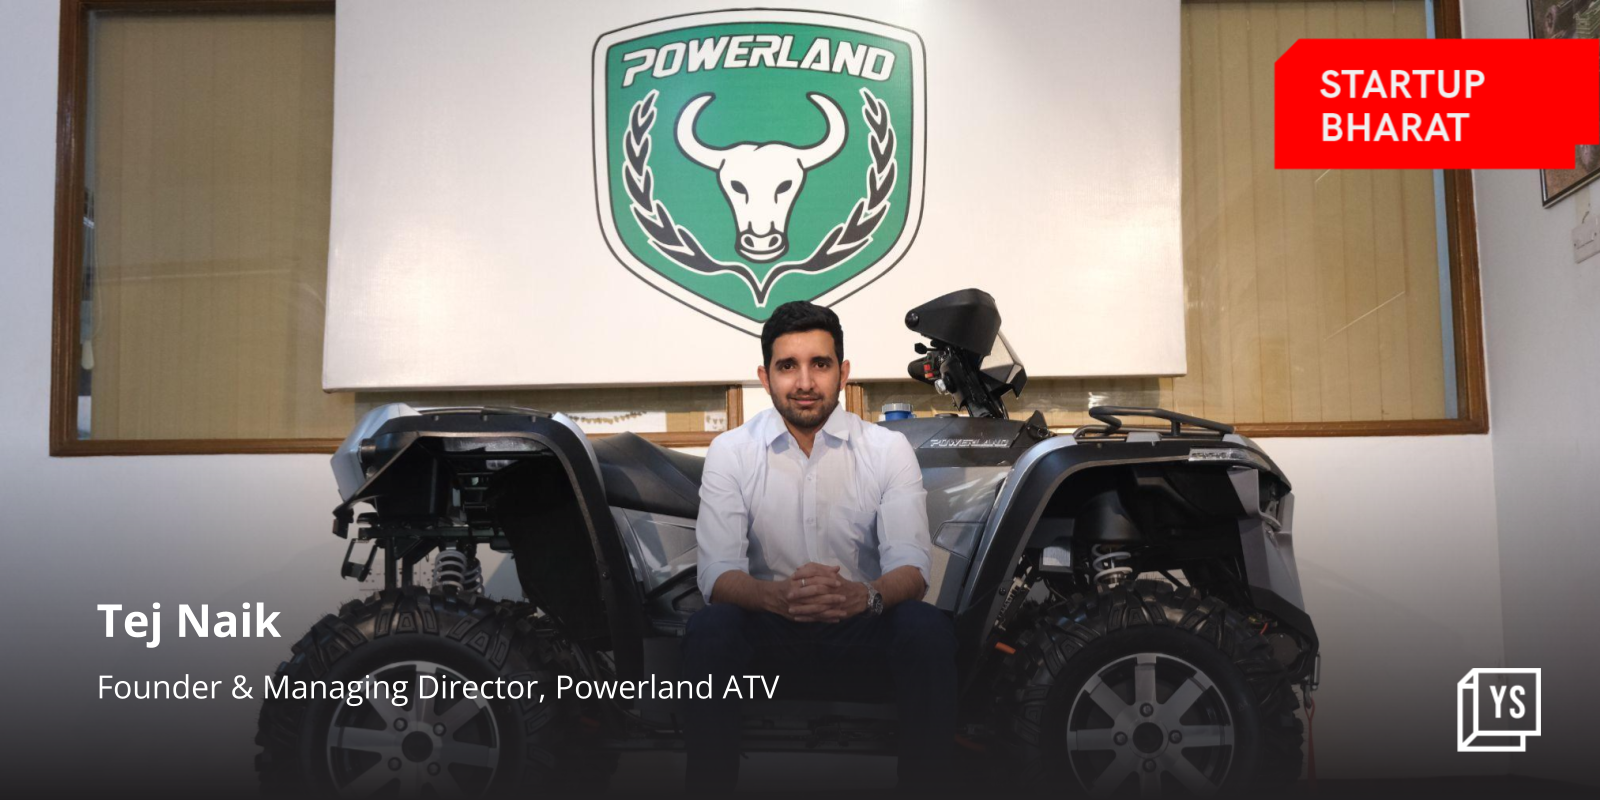 From Powerland: Electric ATVs for agriculture, defence and adventure sports